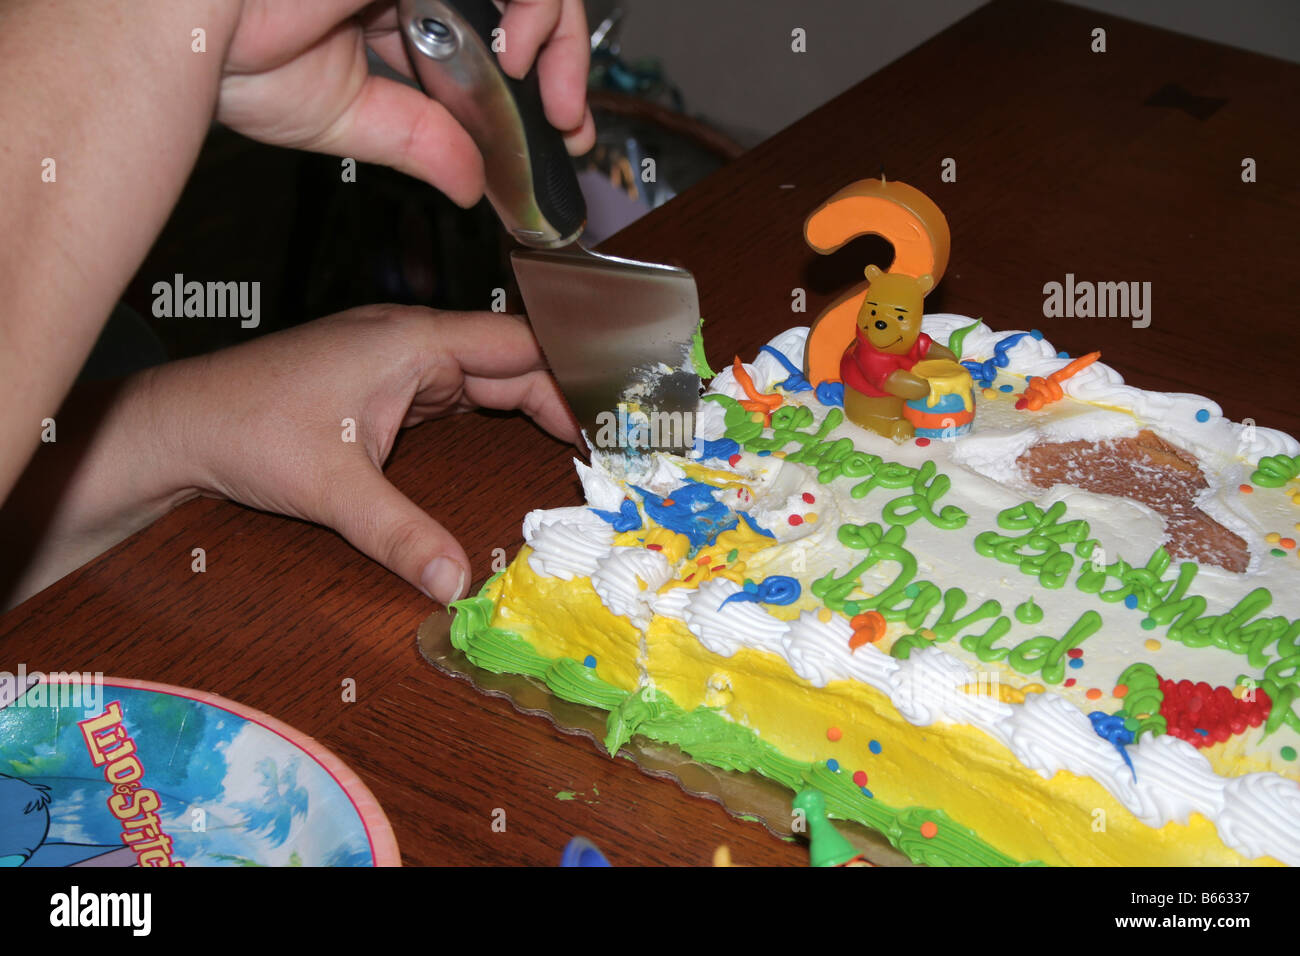 hands cutting a piece of birthday cake Stock Photo